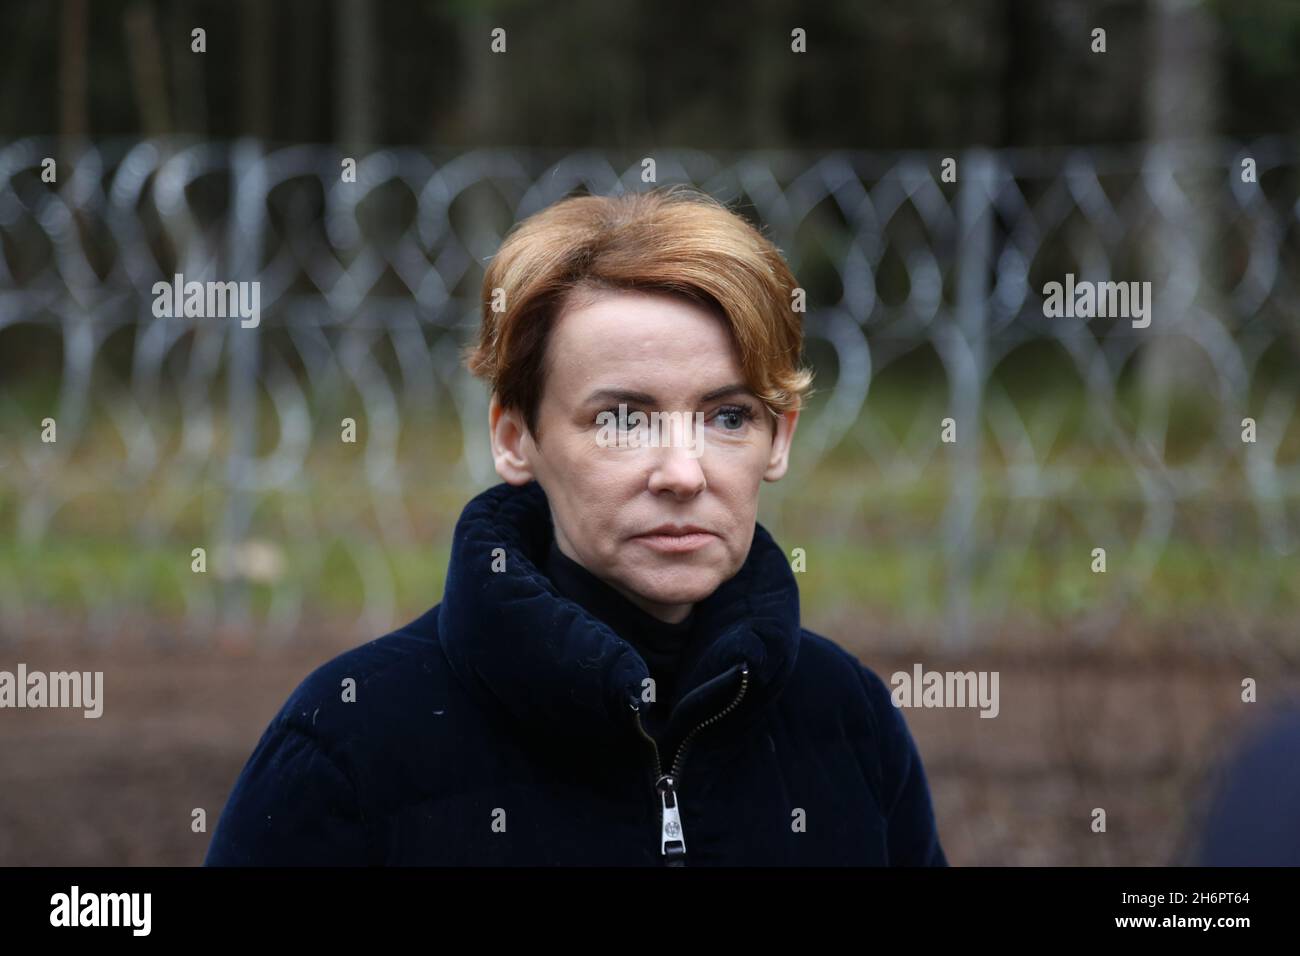 17 November 2021, Latvia, Kaplava: Latvia's Interior Minister Marija Golubeva stands at Kaplava near Kraslava on the border with Belarus. The situation on the EU's eastern external border between Latvia and Belarus is stable and under control, according to the government in Riga. No major incidents have been registered so far, Golubeva said. Photo: Alexander Welscher/dpa Stock Photo